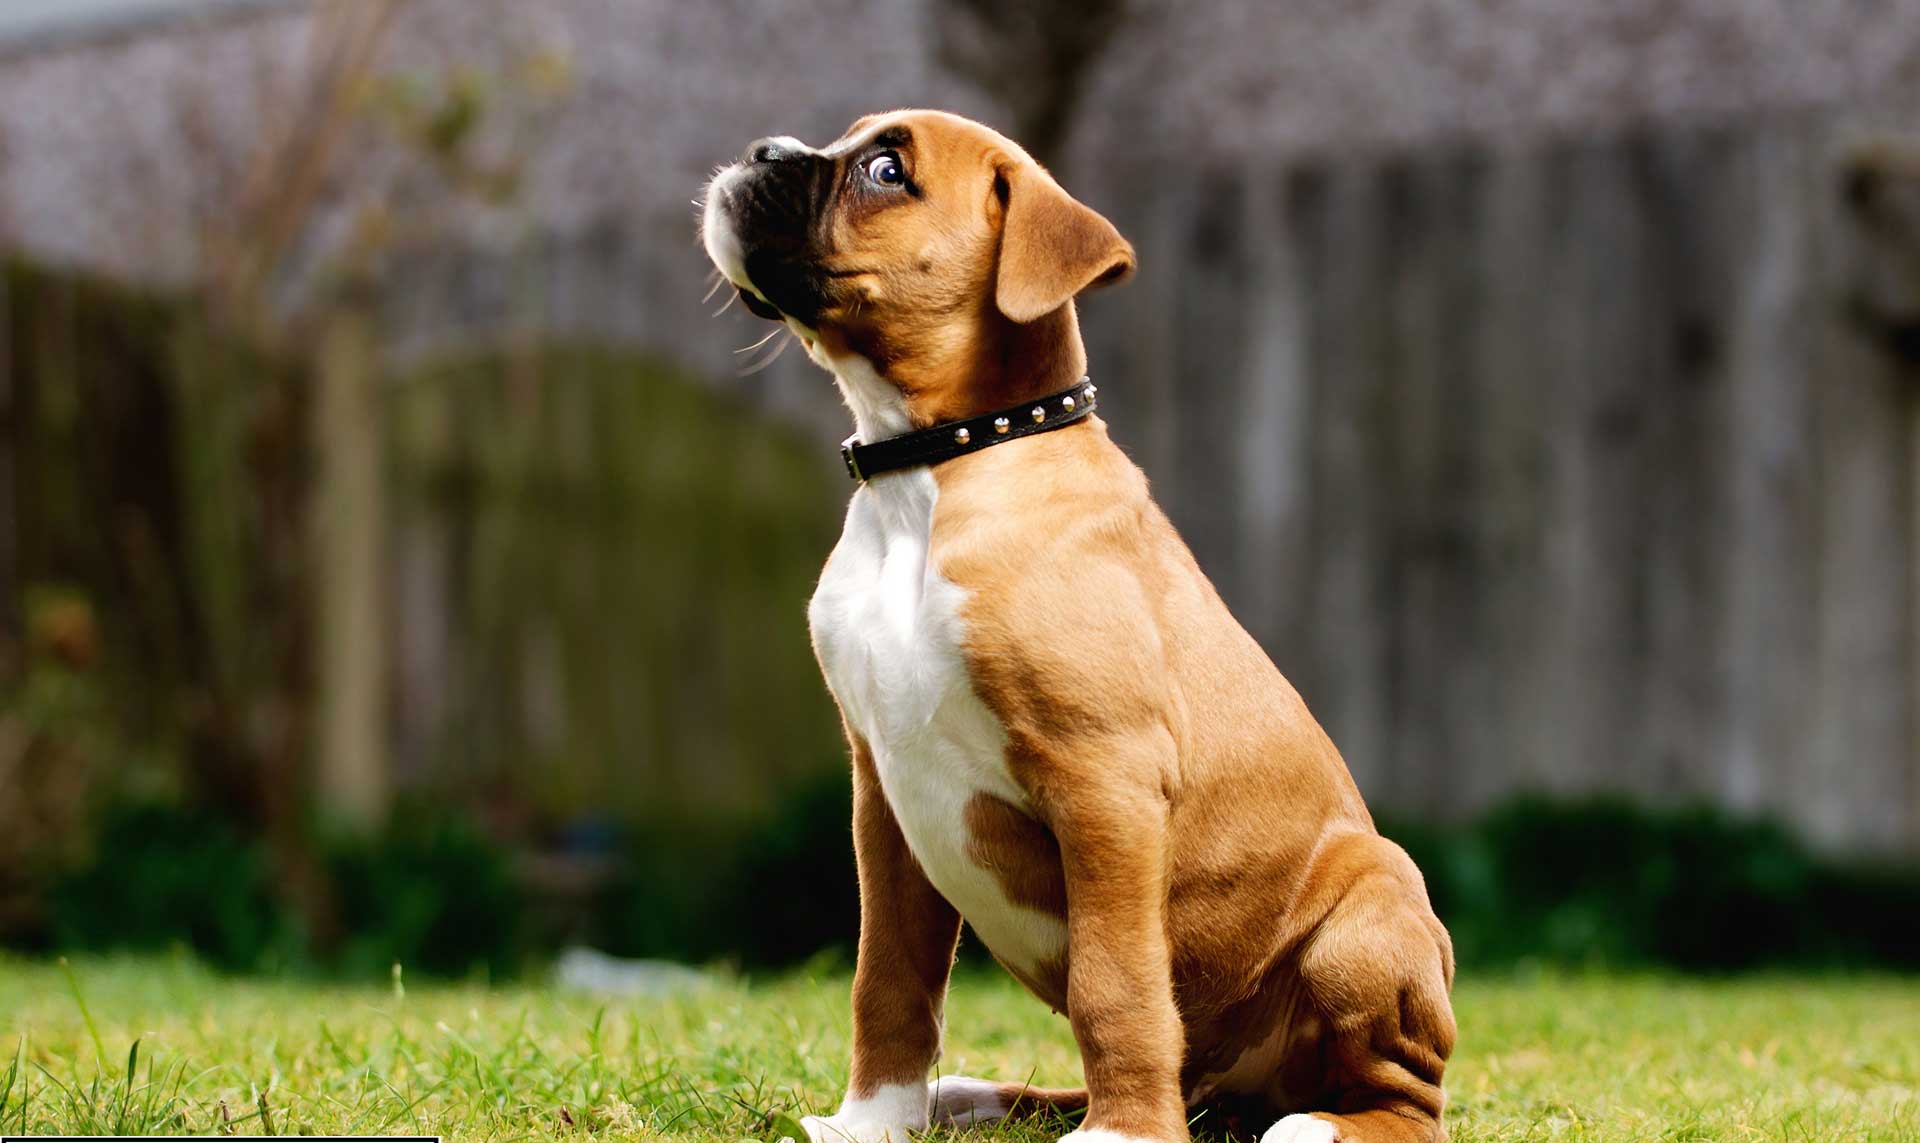 Boxer Puppy Wallpaper Desktop HD. All Puppies Picture and Wallpaper